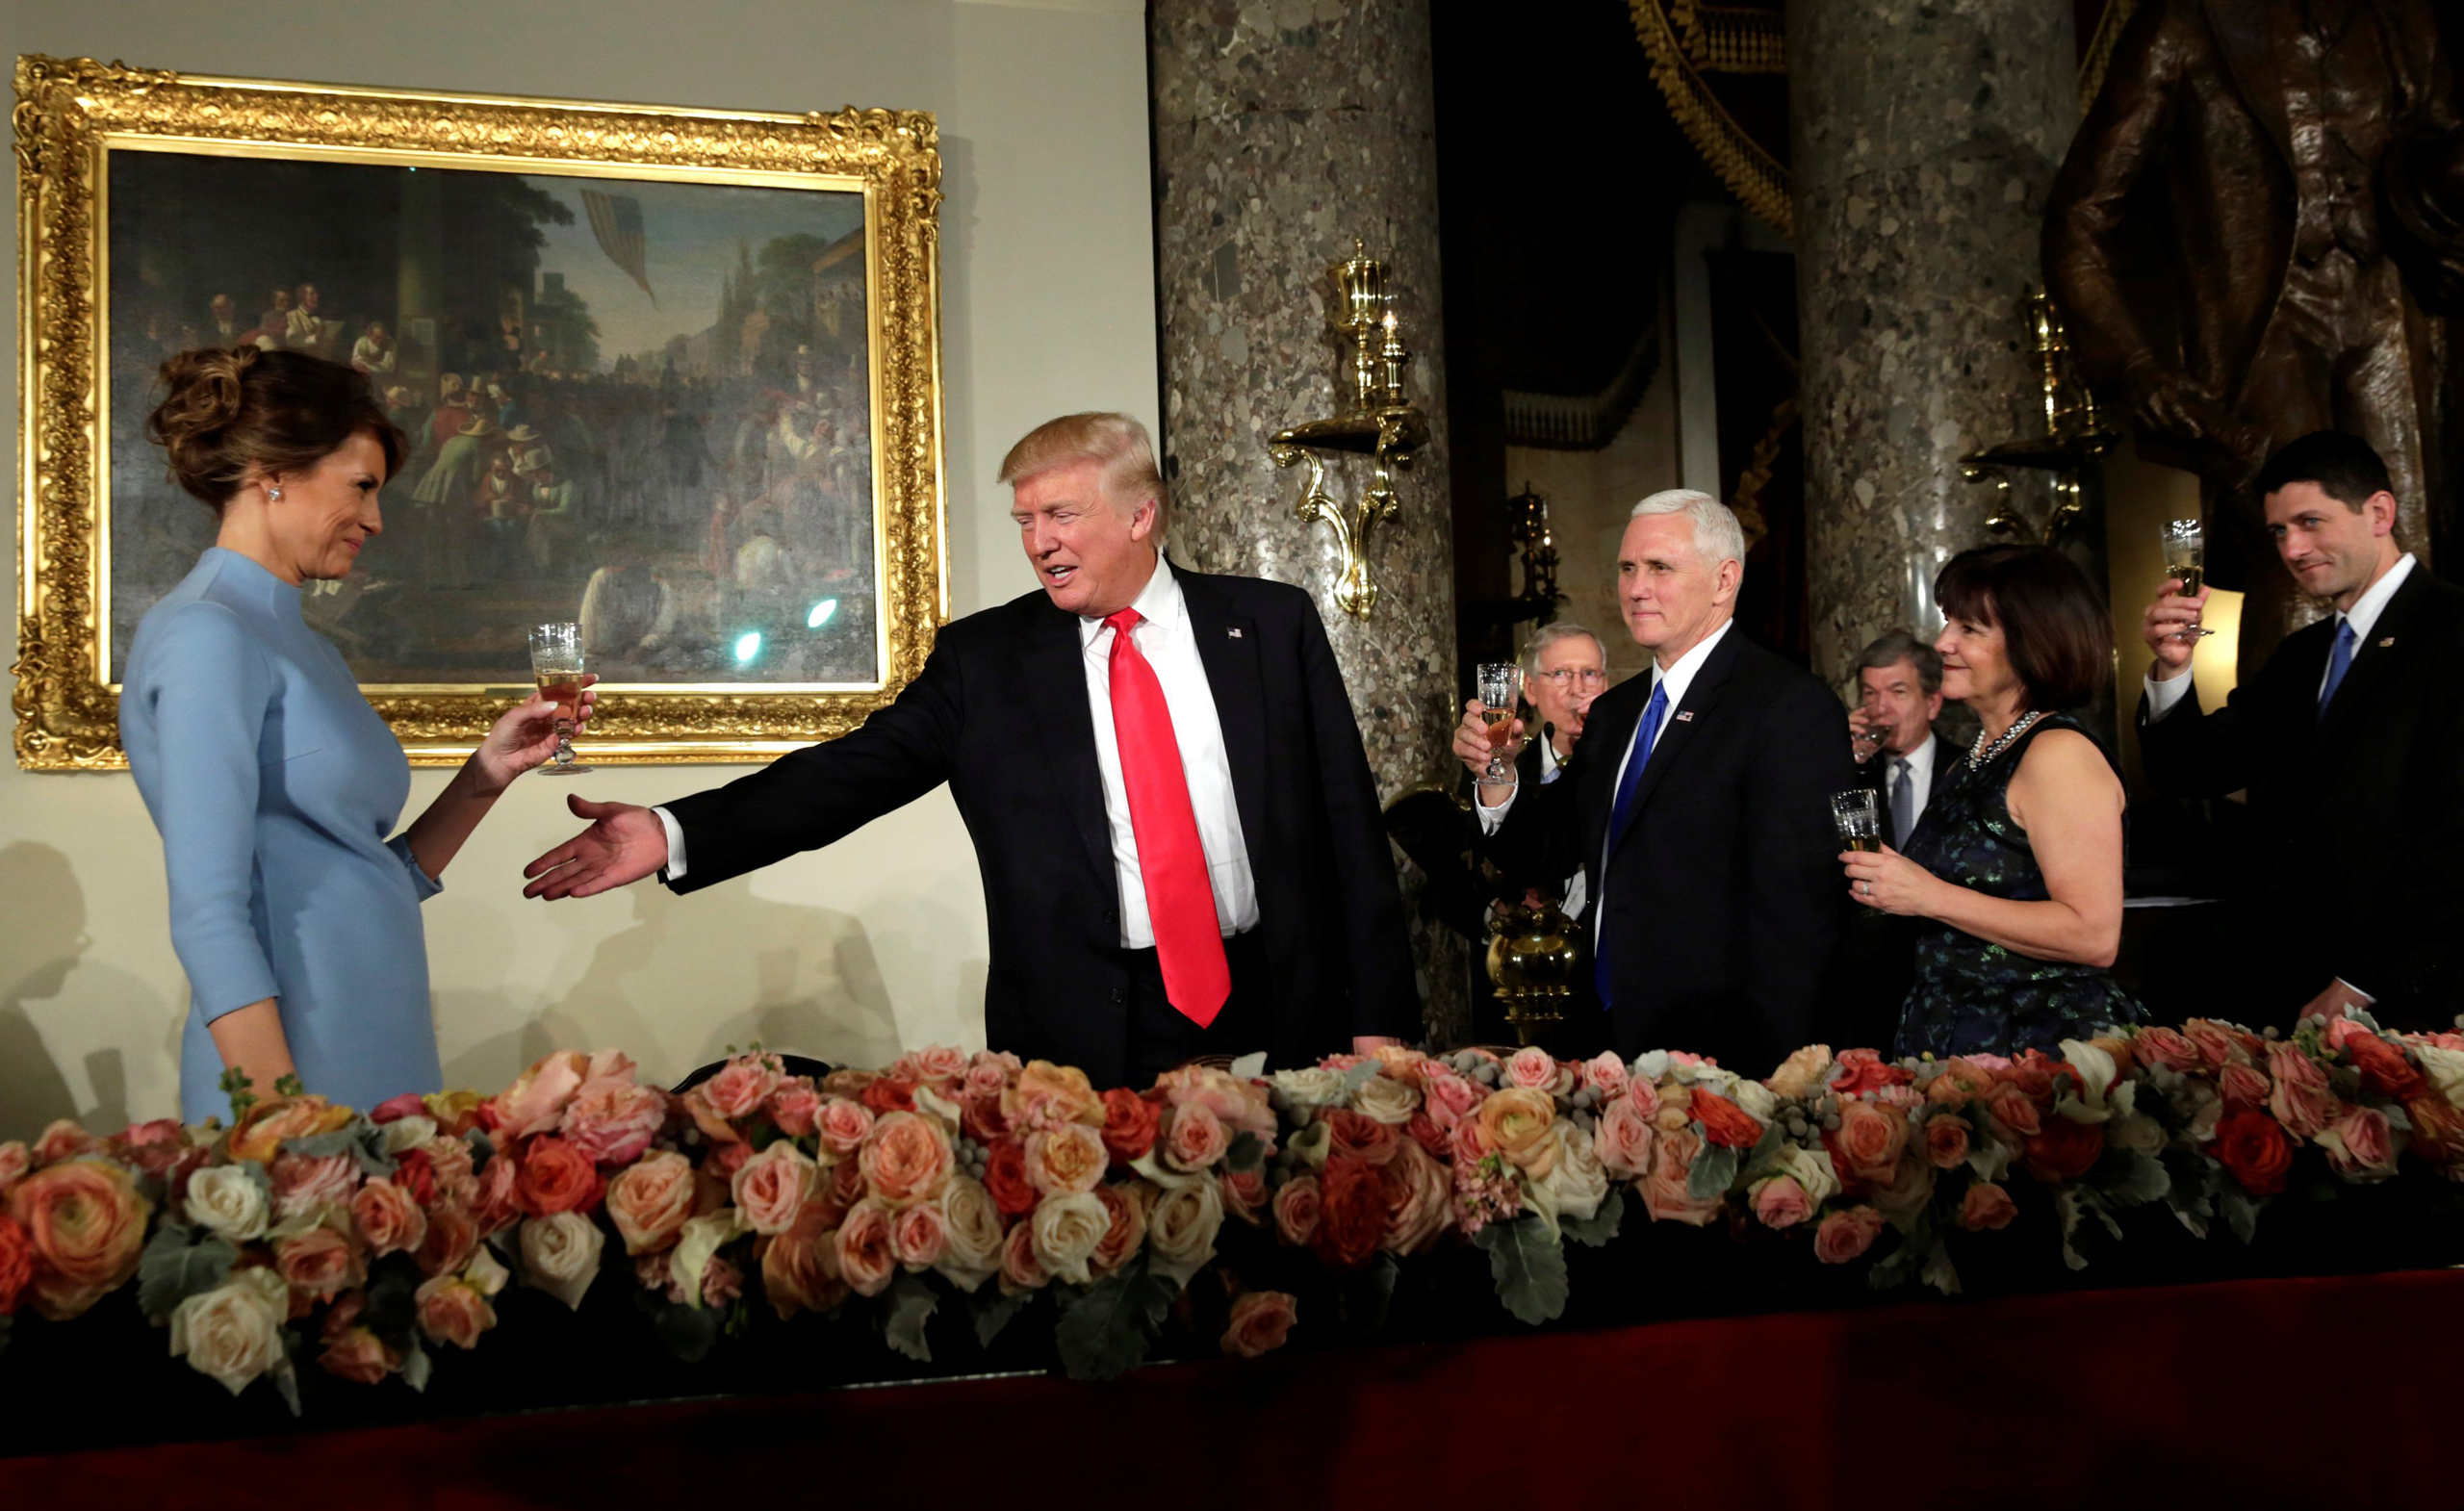 President Donald Trump gestures during a toast at the Inaugural luncheon